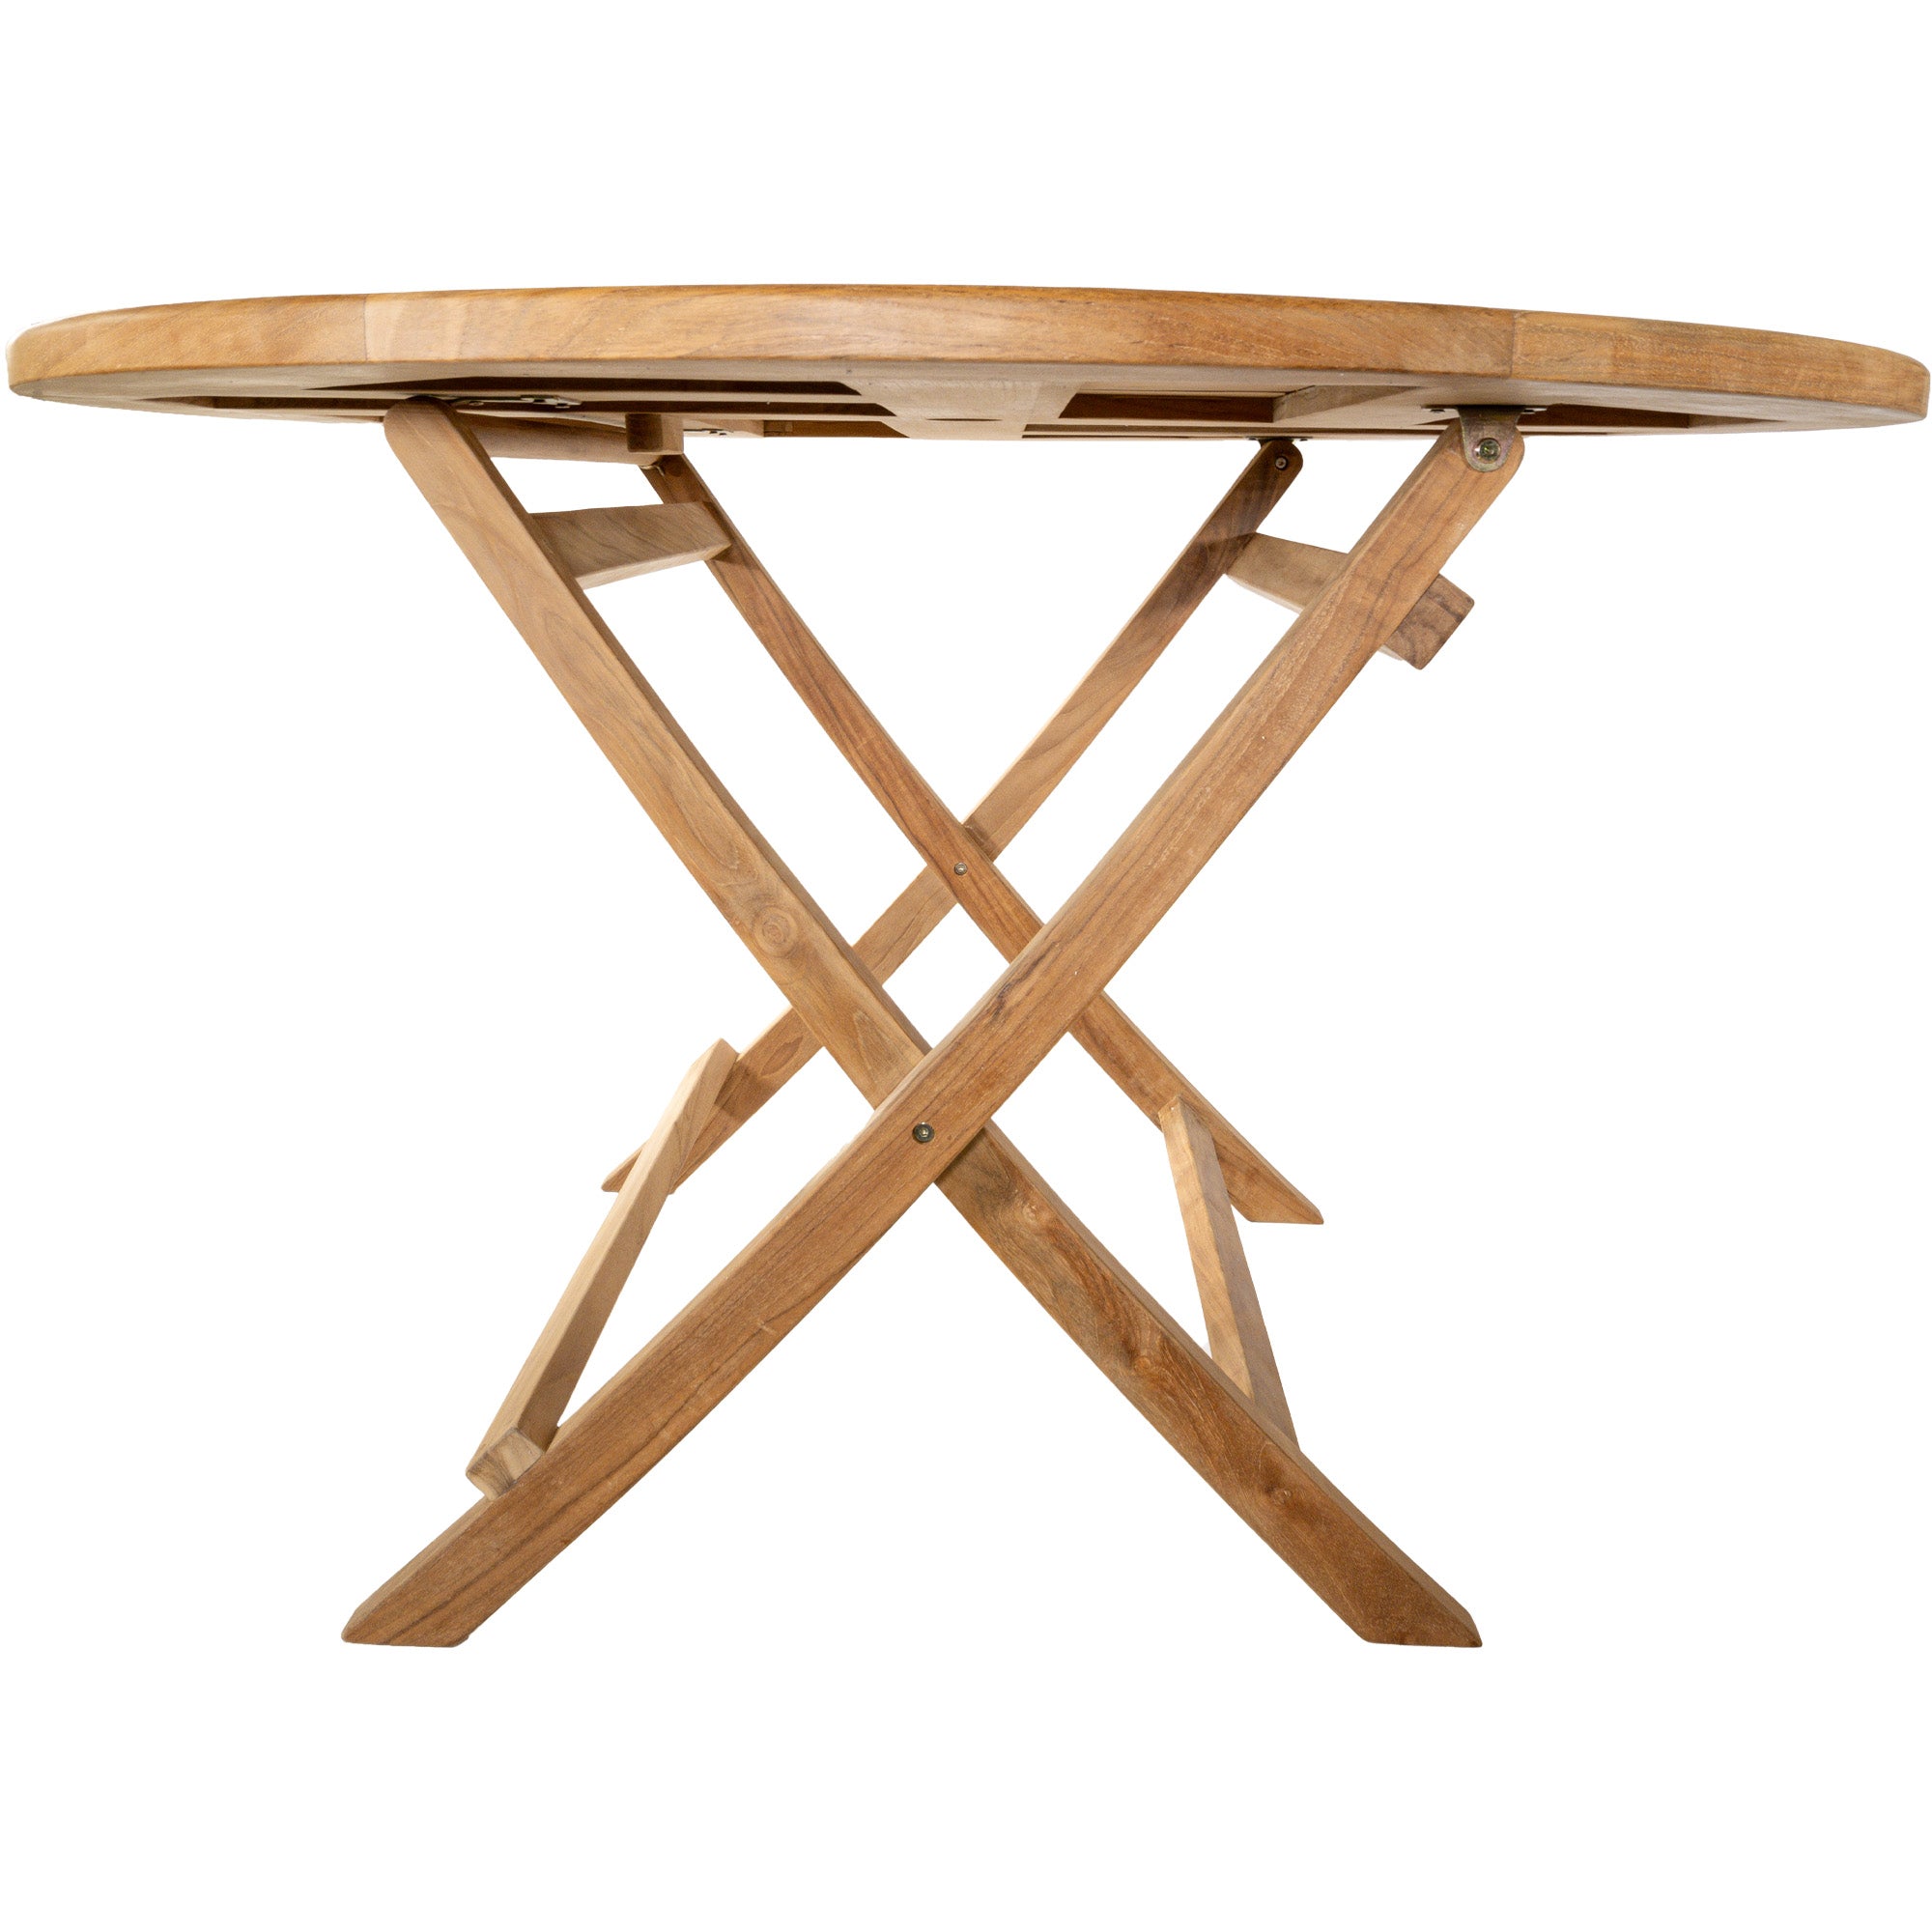 Tesoro Natural Teak Outdoor Foldable Round Dining Table - 47"